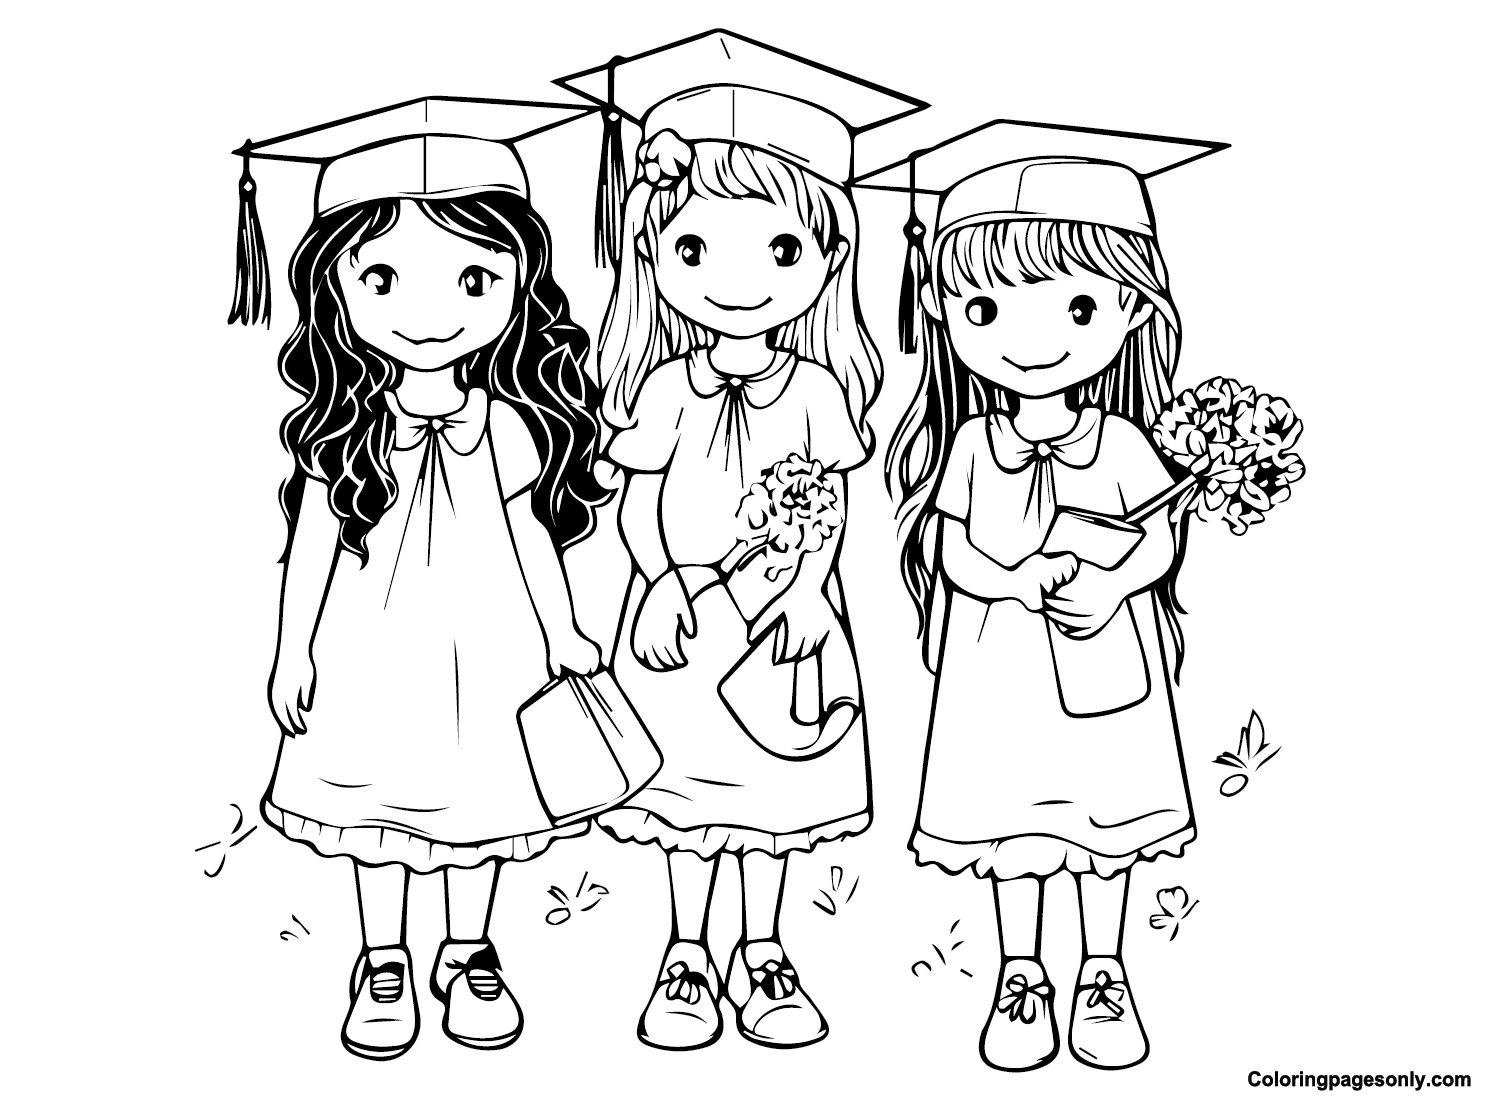 girls-in-the-last-day-of-school-coloring-pages-free-printable